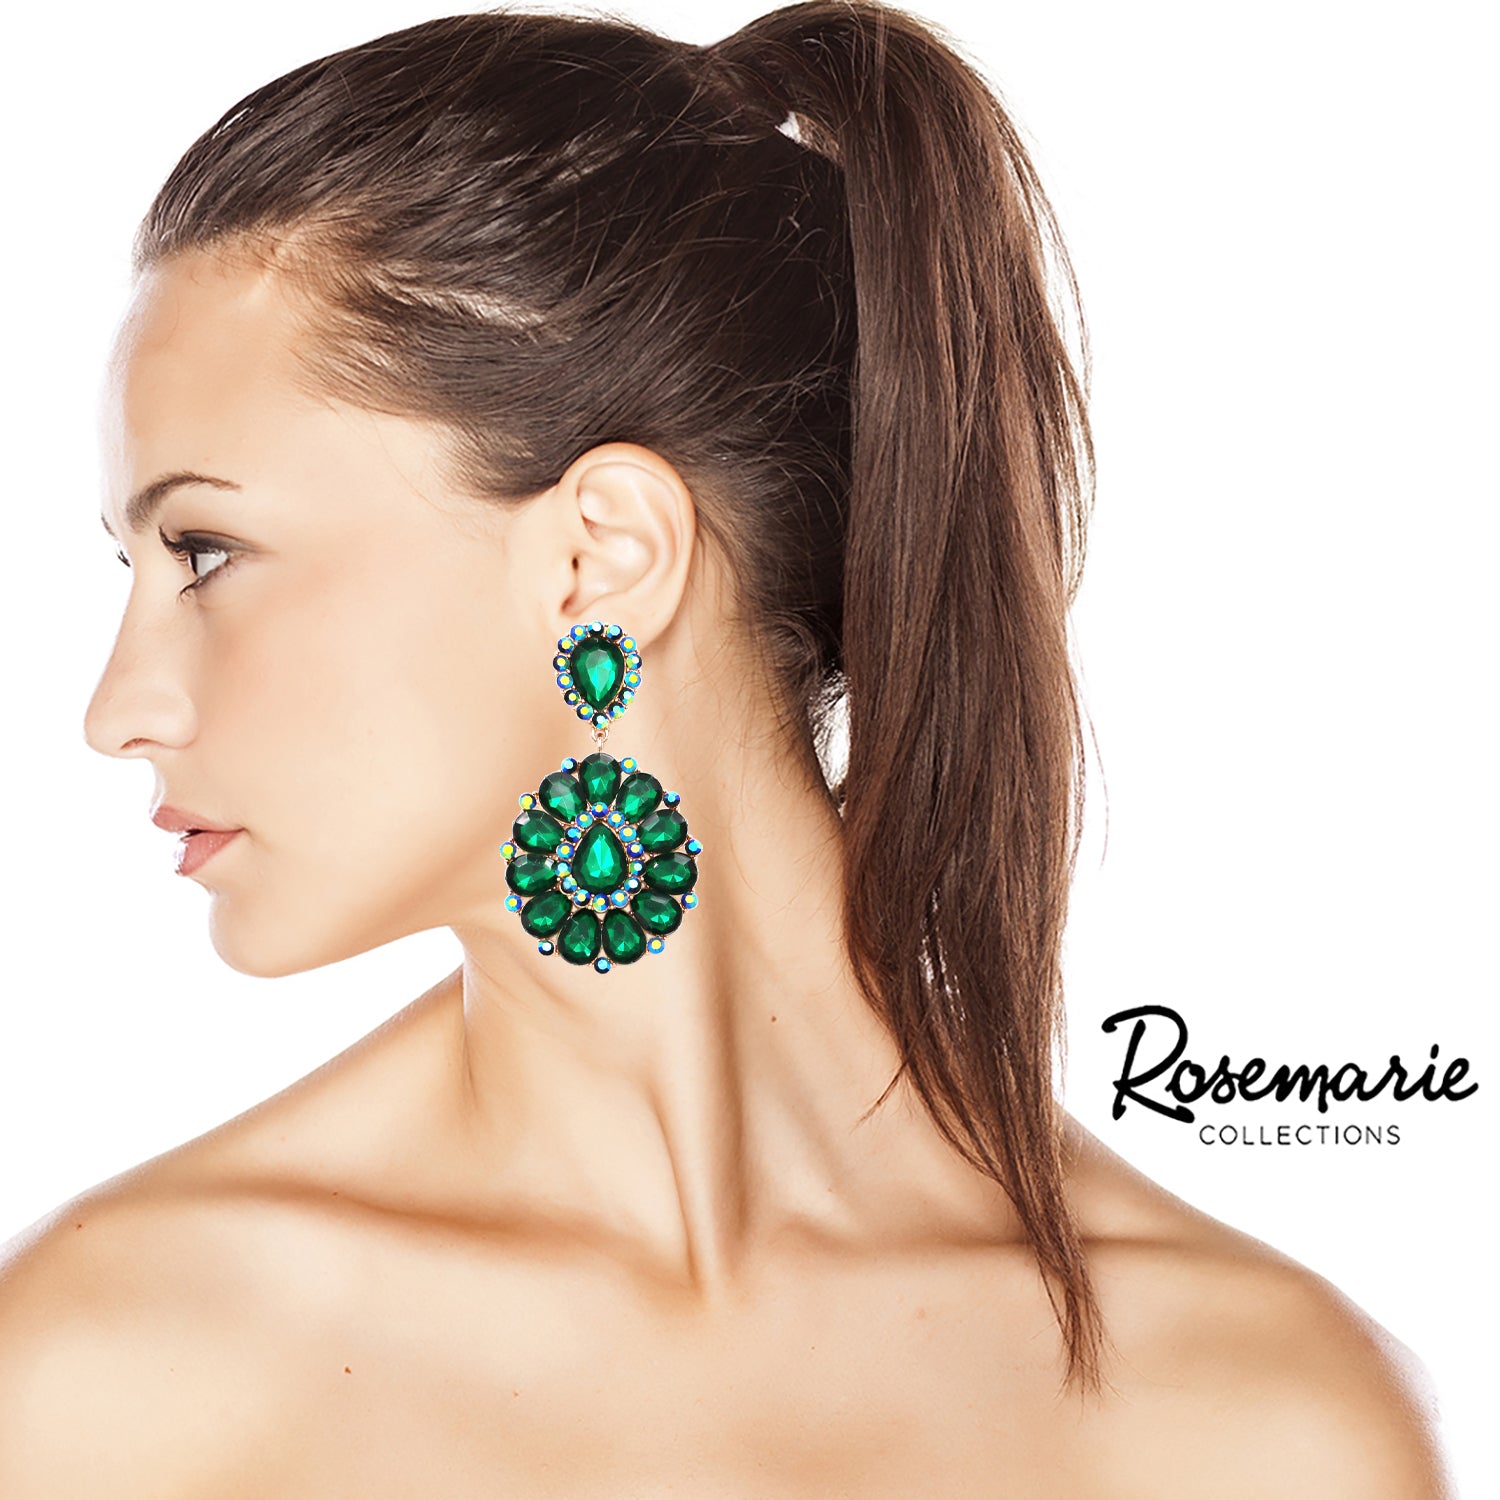 Dramatic Crystal Long Shoulder Duster Clip On Style Earrings, 3.5" (Emerald Green Crystal Gold Tone Setting)